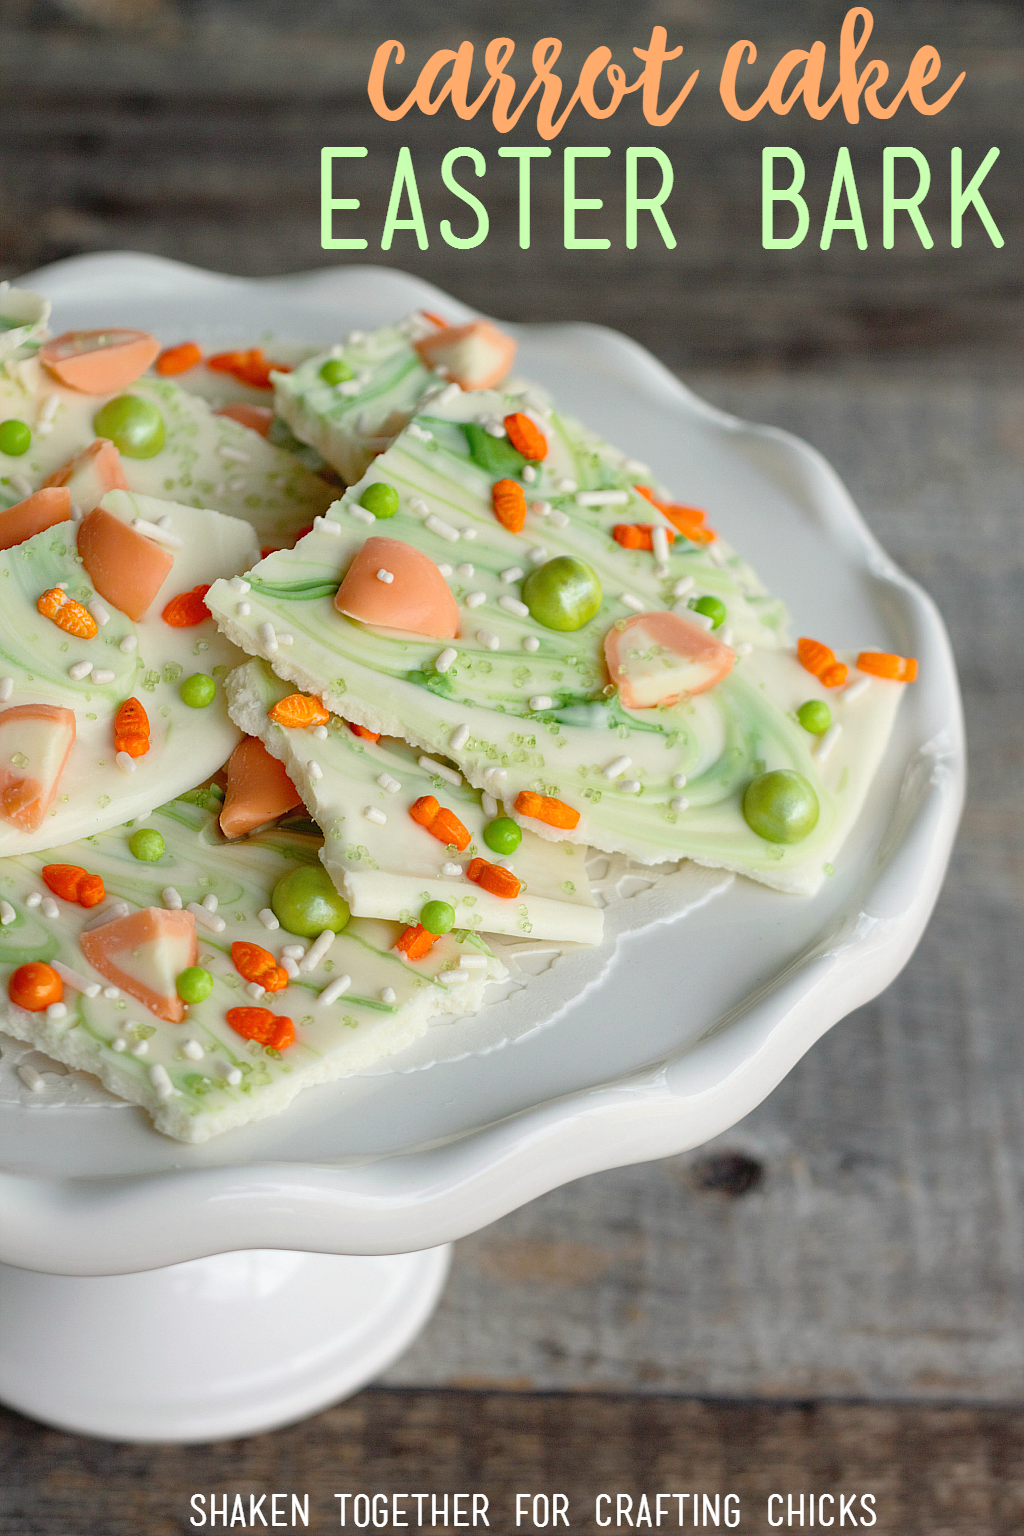 Carrot Cake Easter Bark is an easy, no-bake Easter dessert that is perfect to make with the kids!